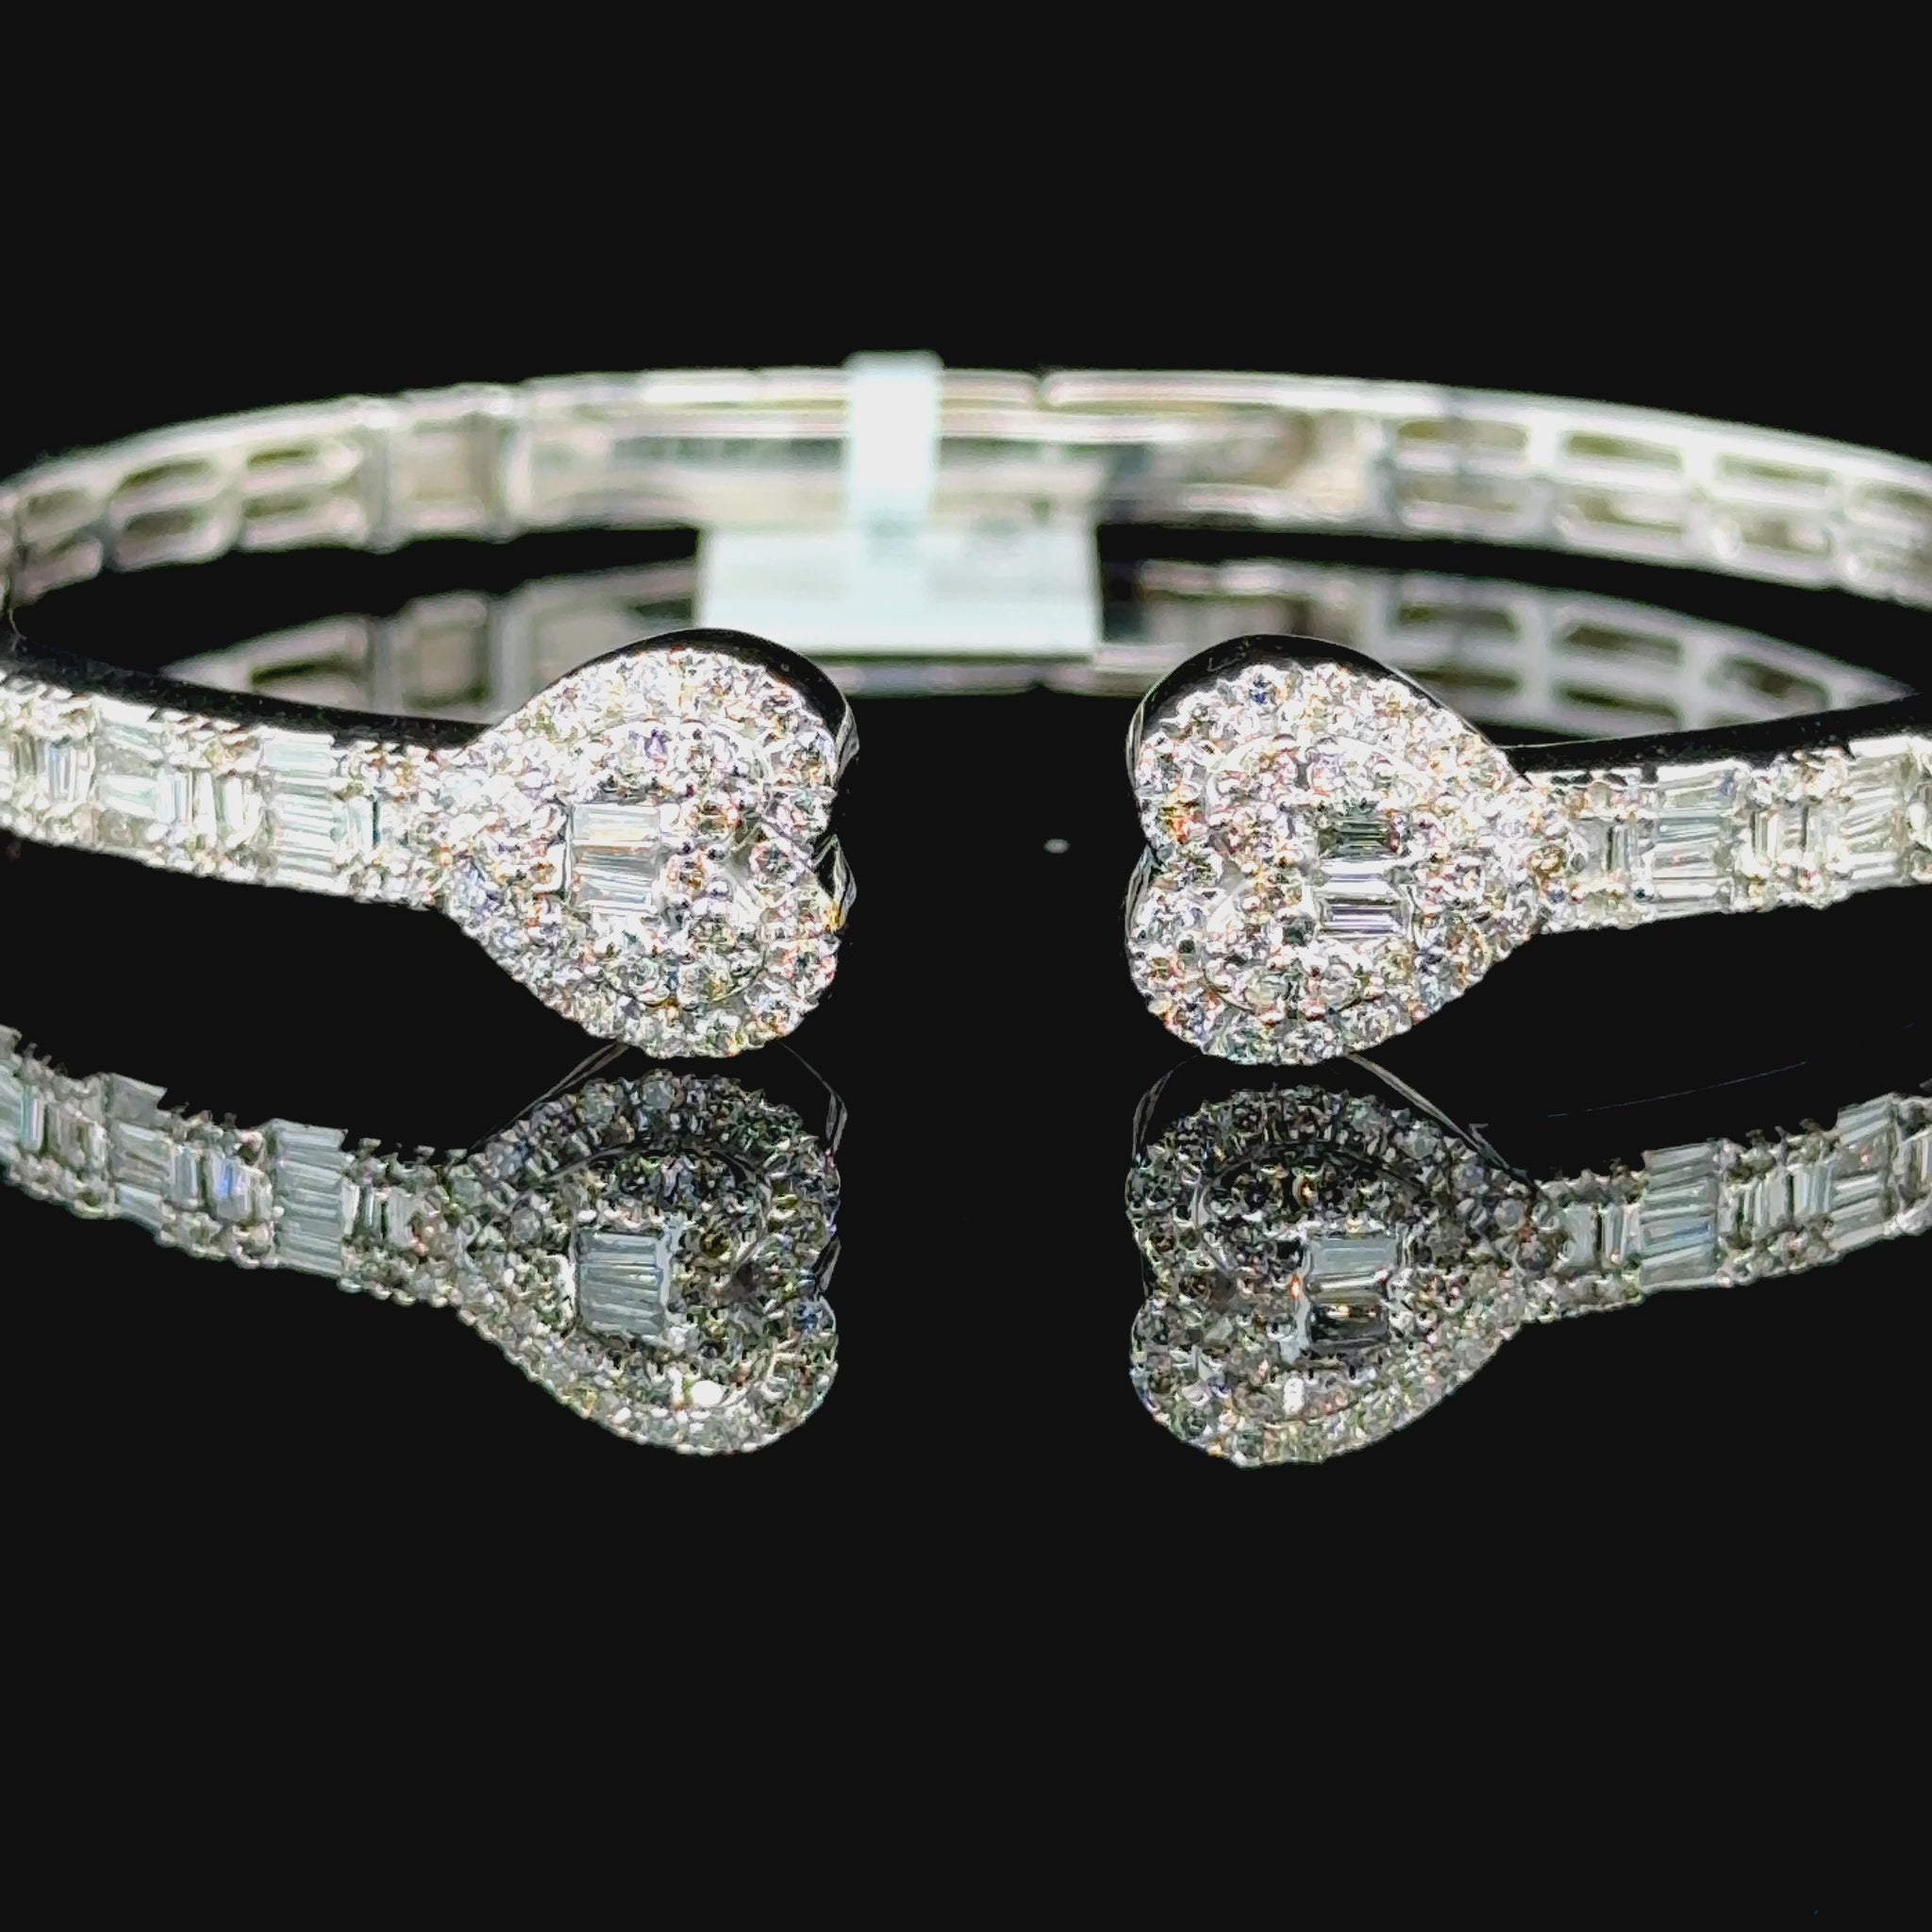 Excellent Heart Shape White Gold and Diamond Bangle Bracelet for valentines day